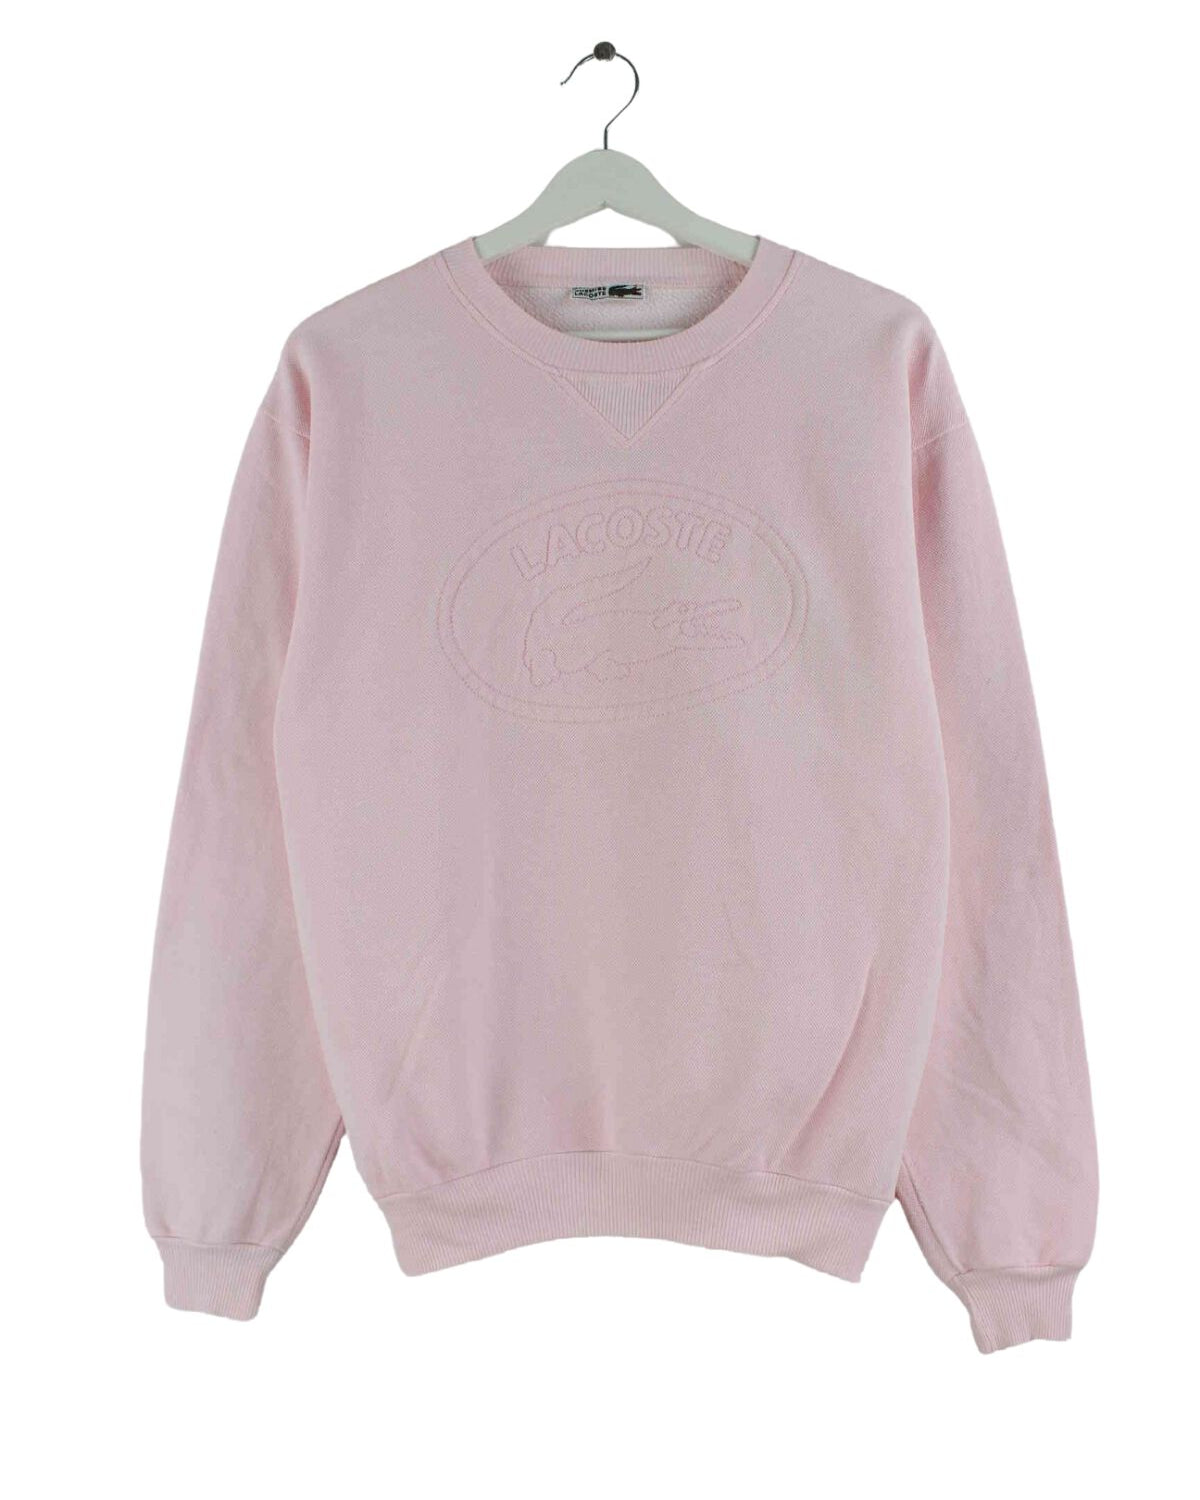 Lacoste Damen 90s Vintage Embroidered Sweater Rosa M (front image)